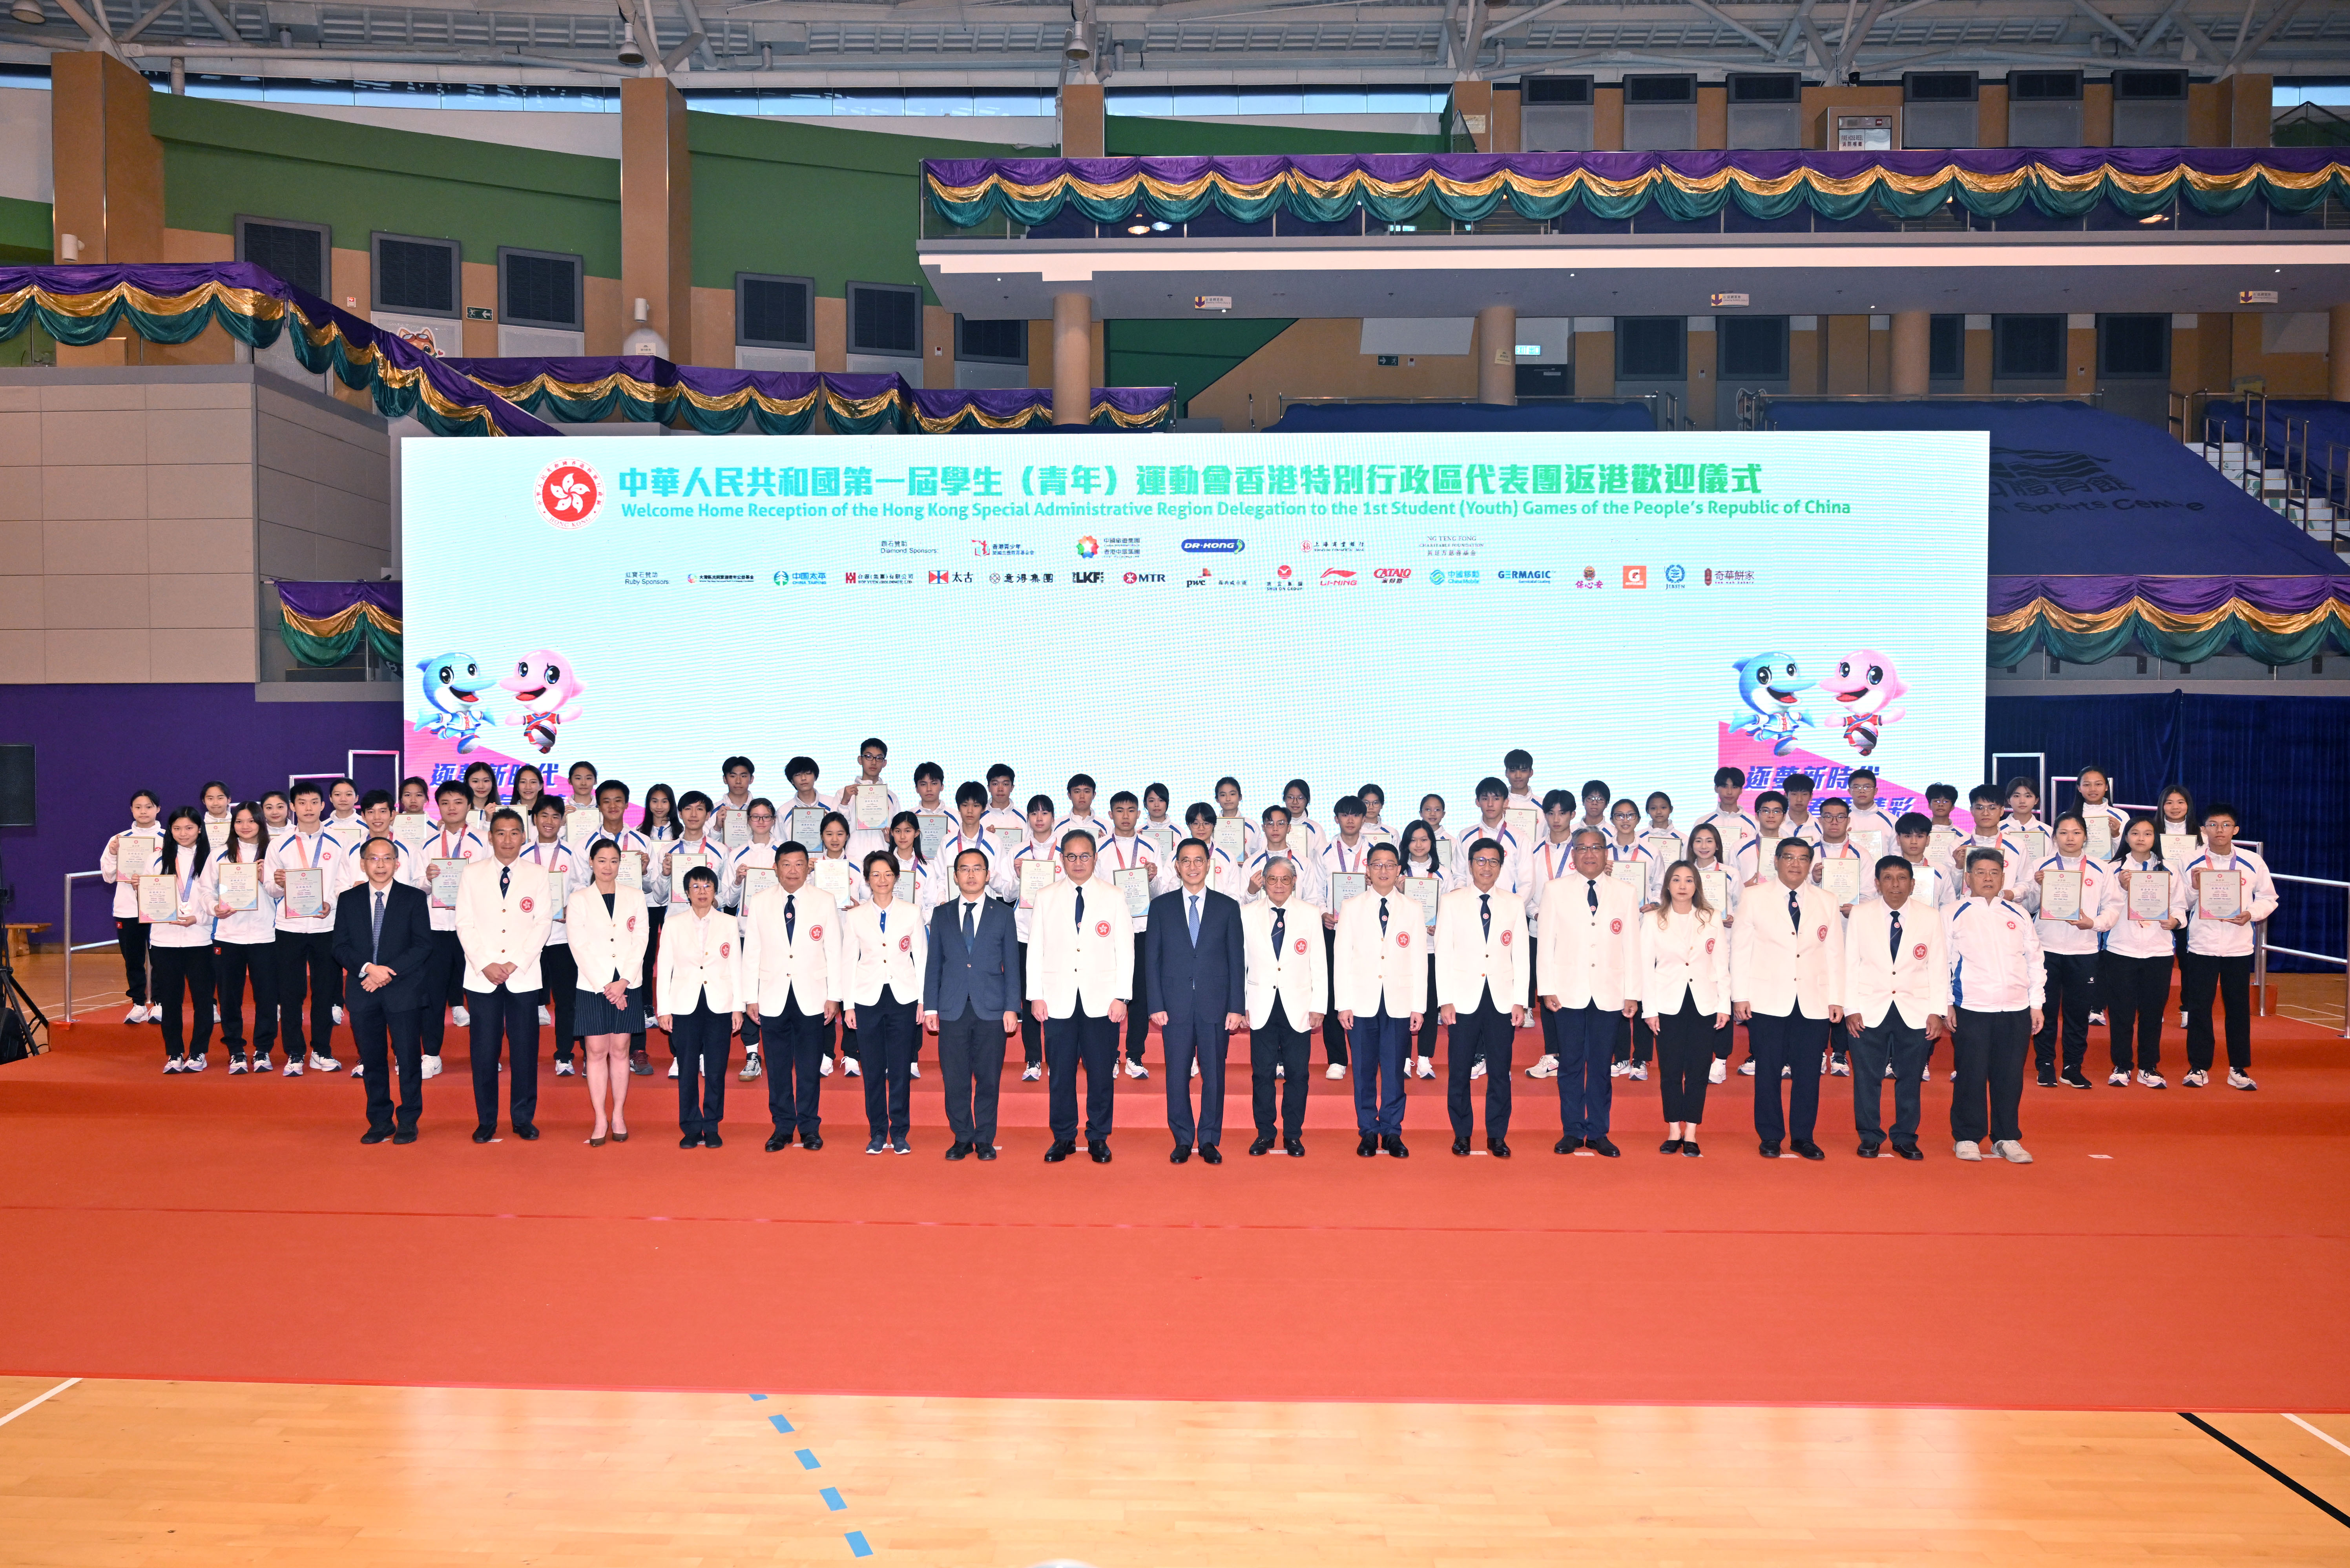 Group photo of members of the HKSAR Delegation to the 1st NSYG and athletes at the Welcome Home Ceremony.